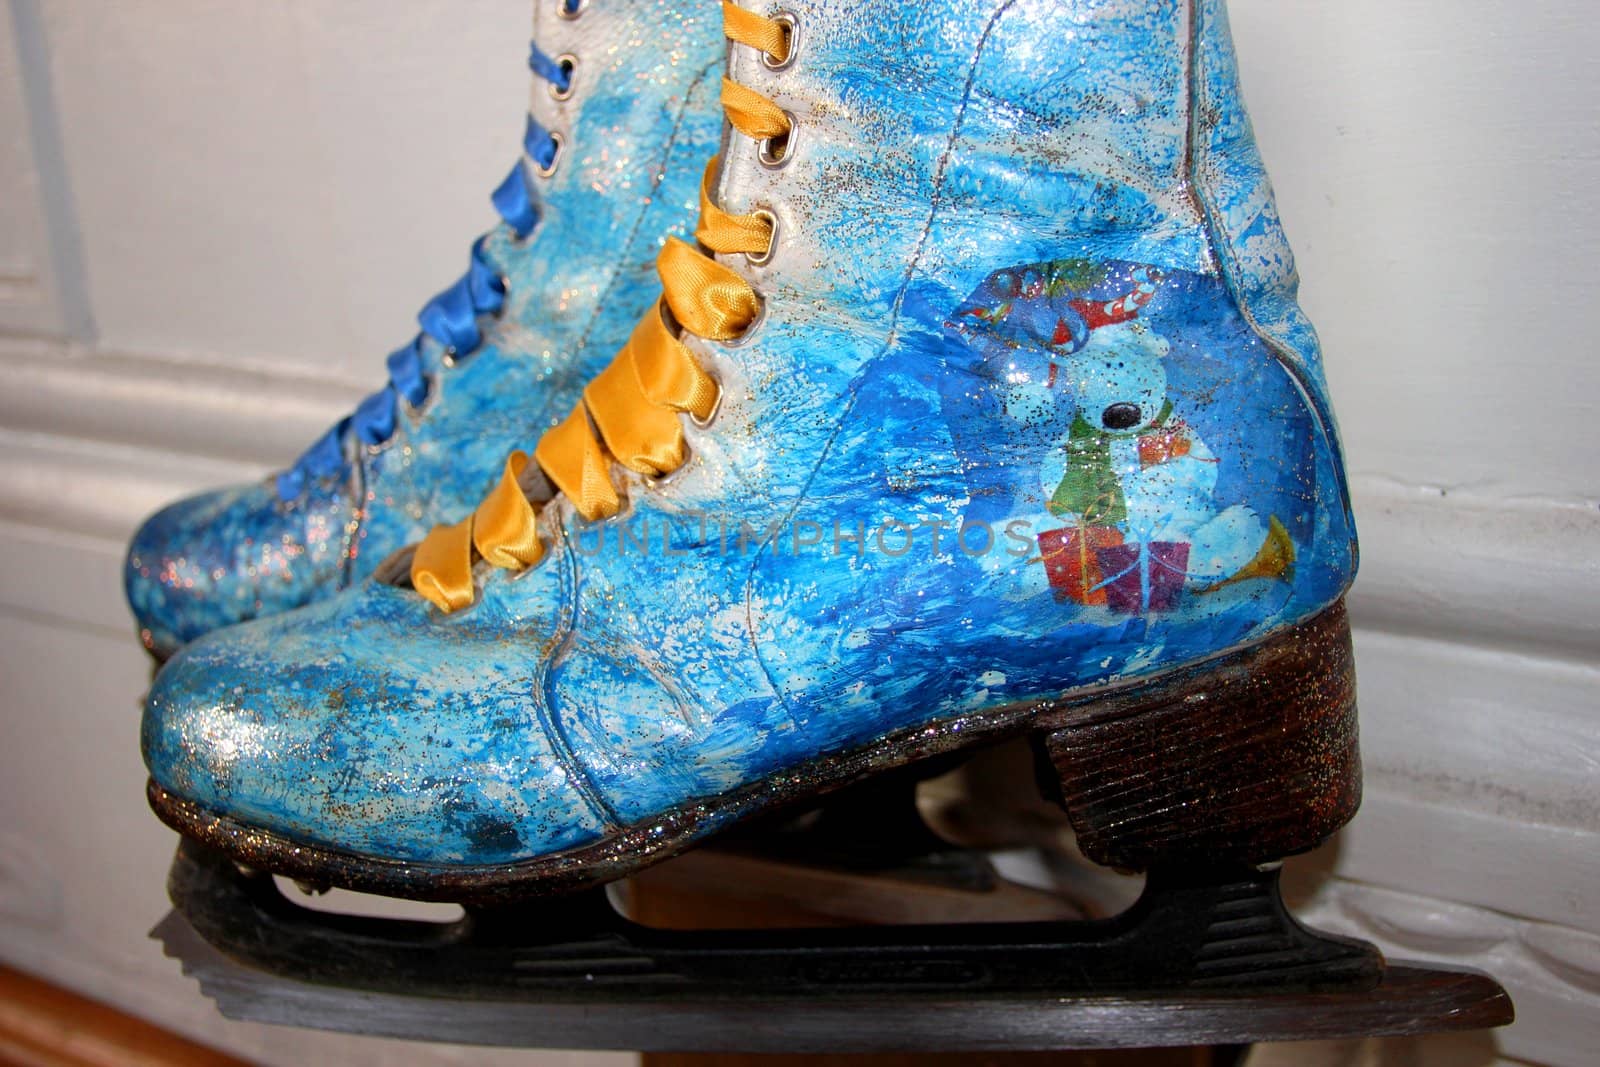 skates painted under winter subjects by Metanna